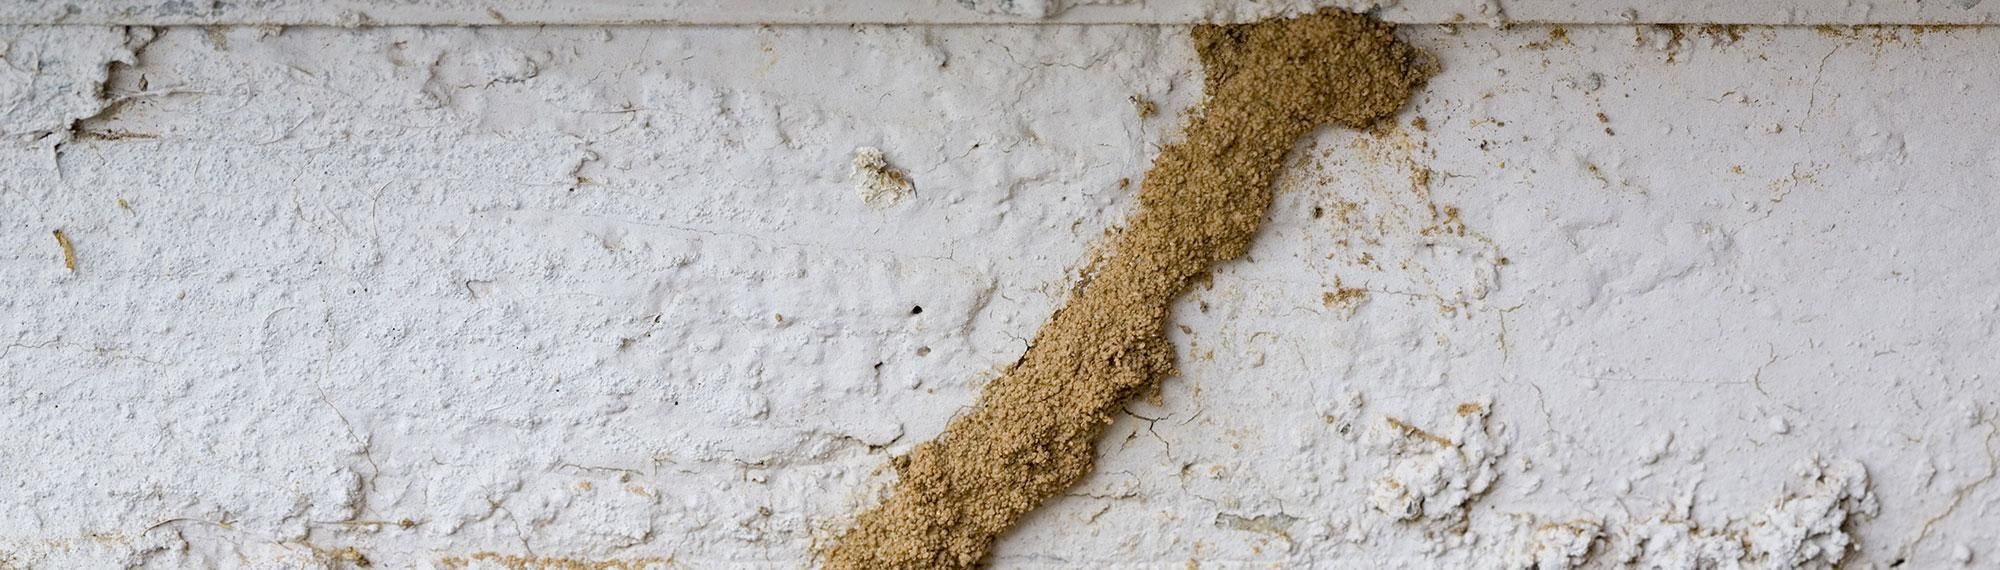 termite mud tubes are a warning sign of termite activity